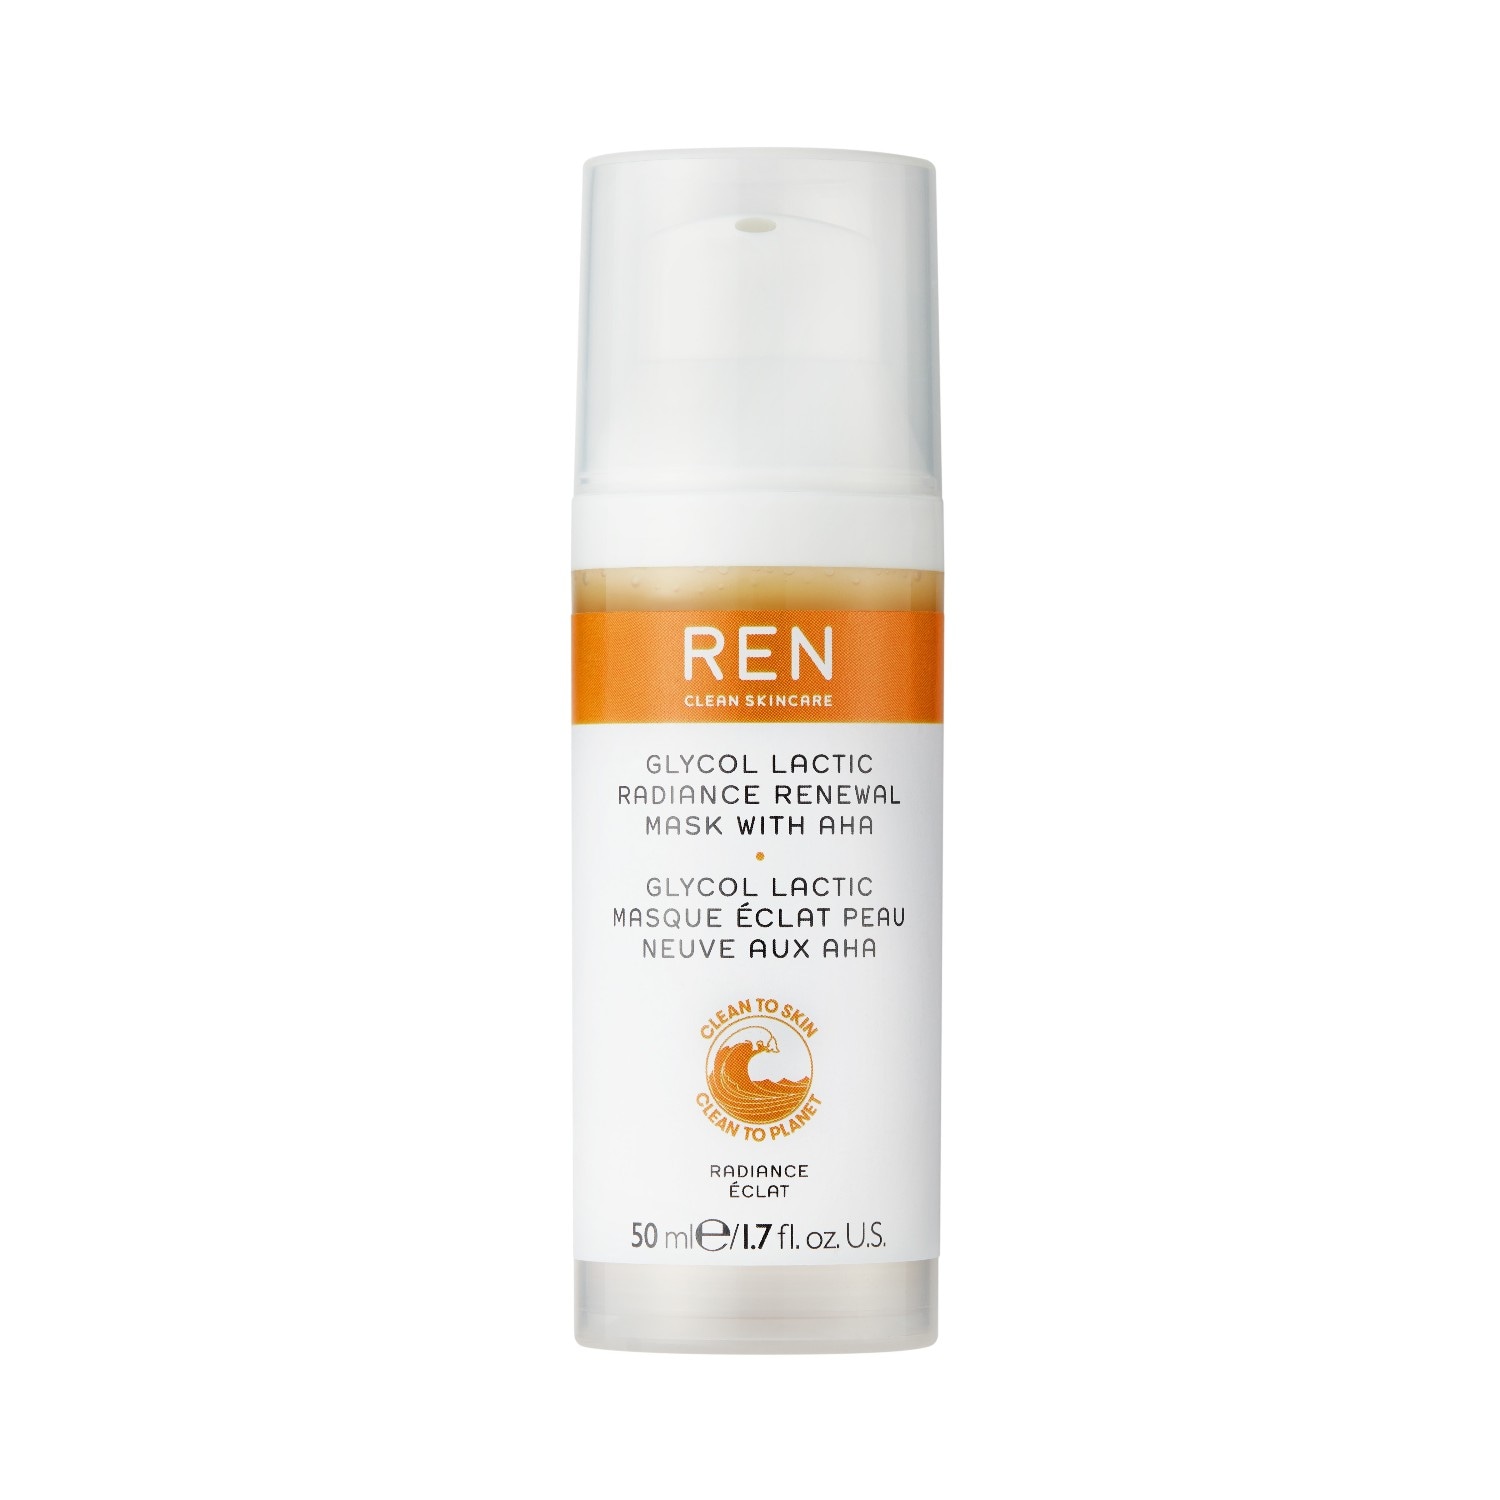 Ren Clean Skincare Glycolic Lactic Radiance Renewal Mask